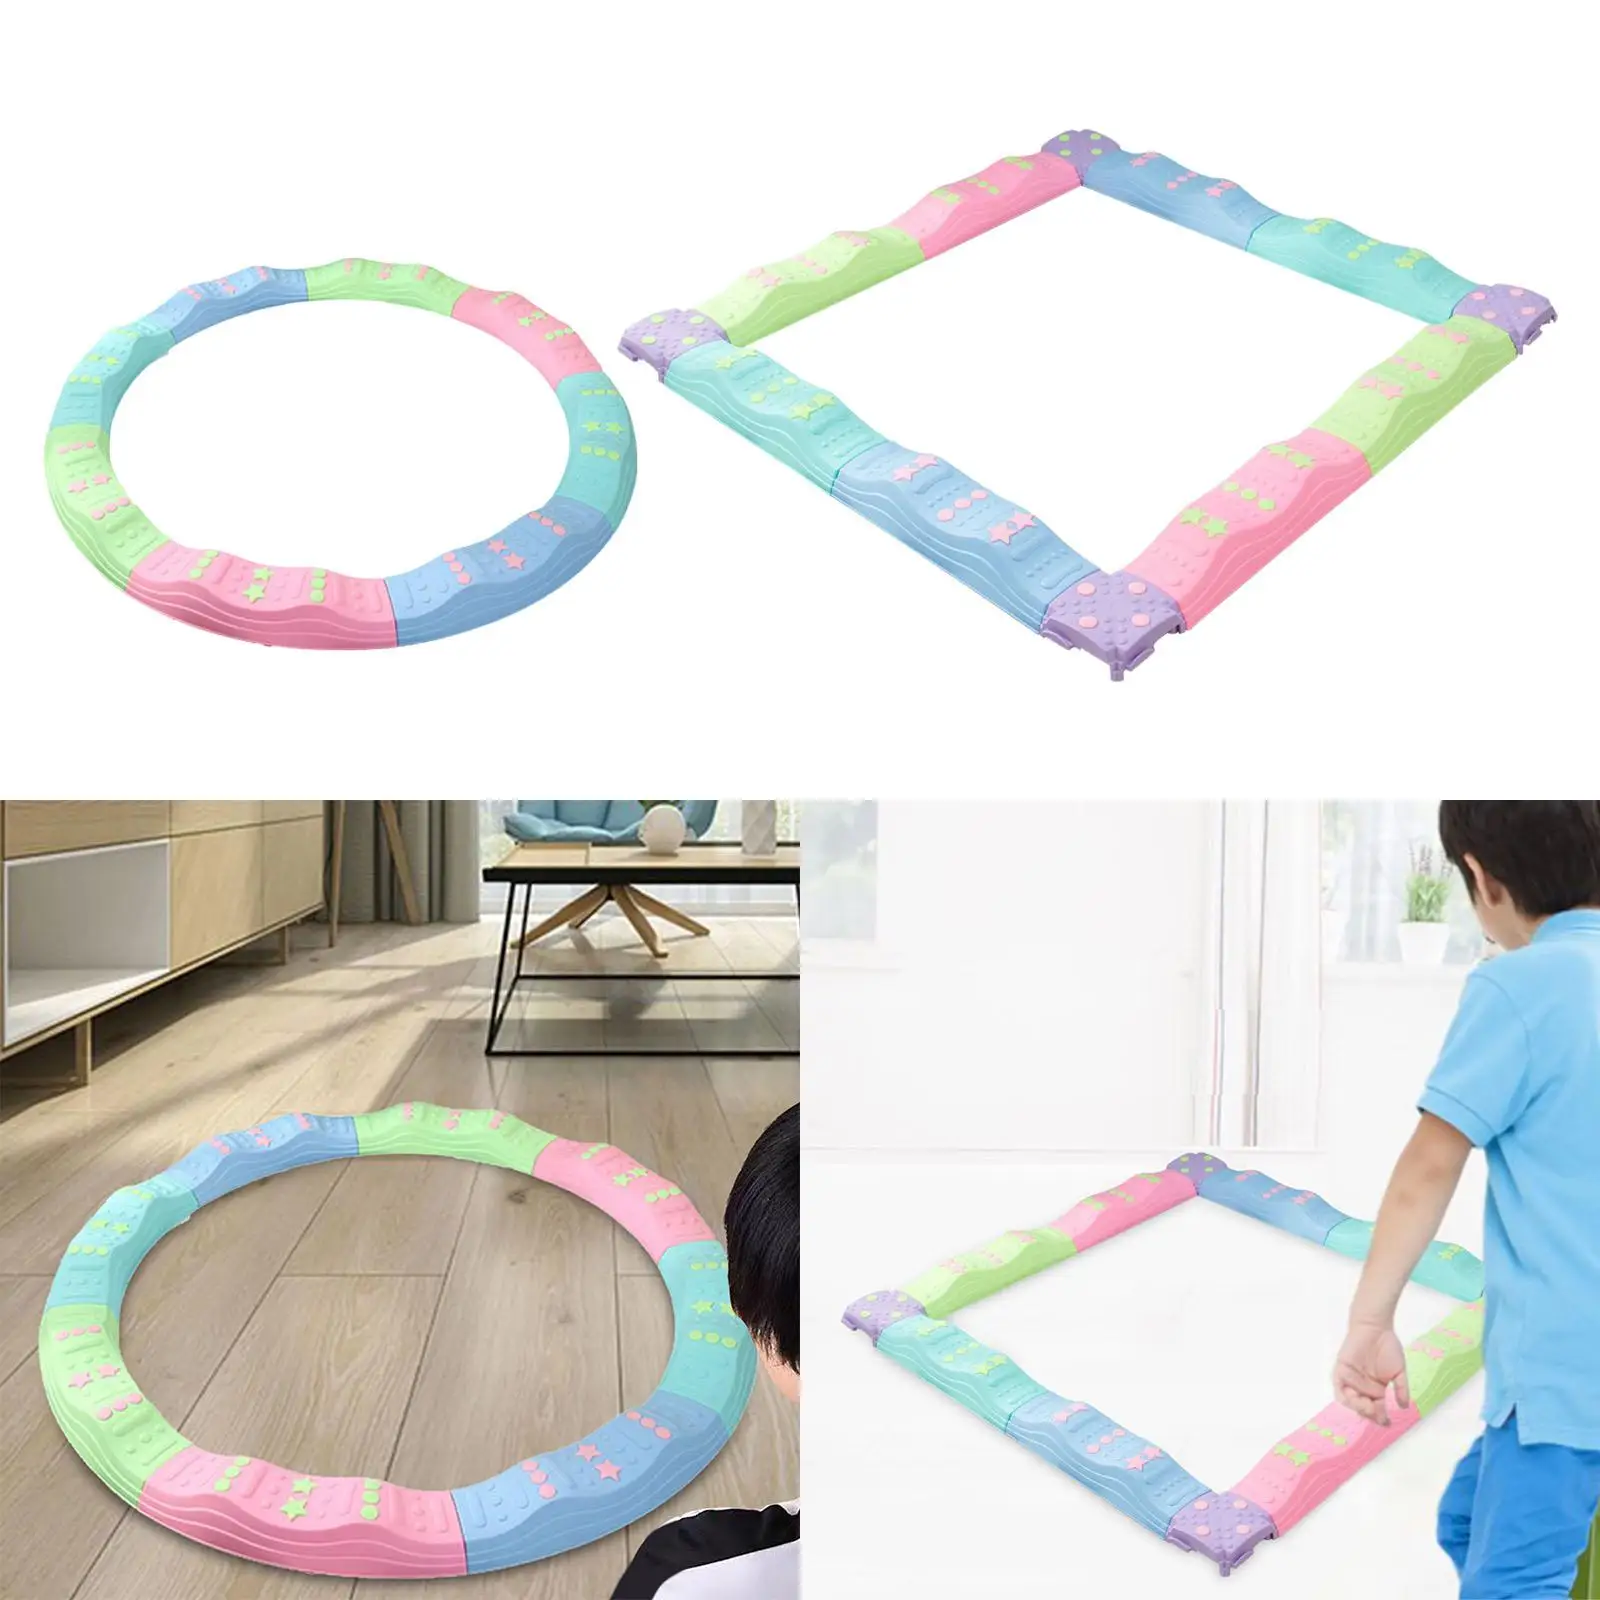 Colored Balance Beams for Kids Toddler Stepping Stones Balance Board